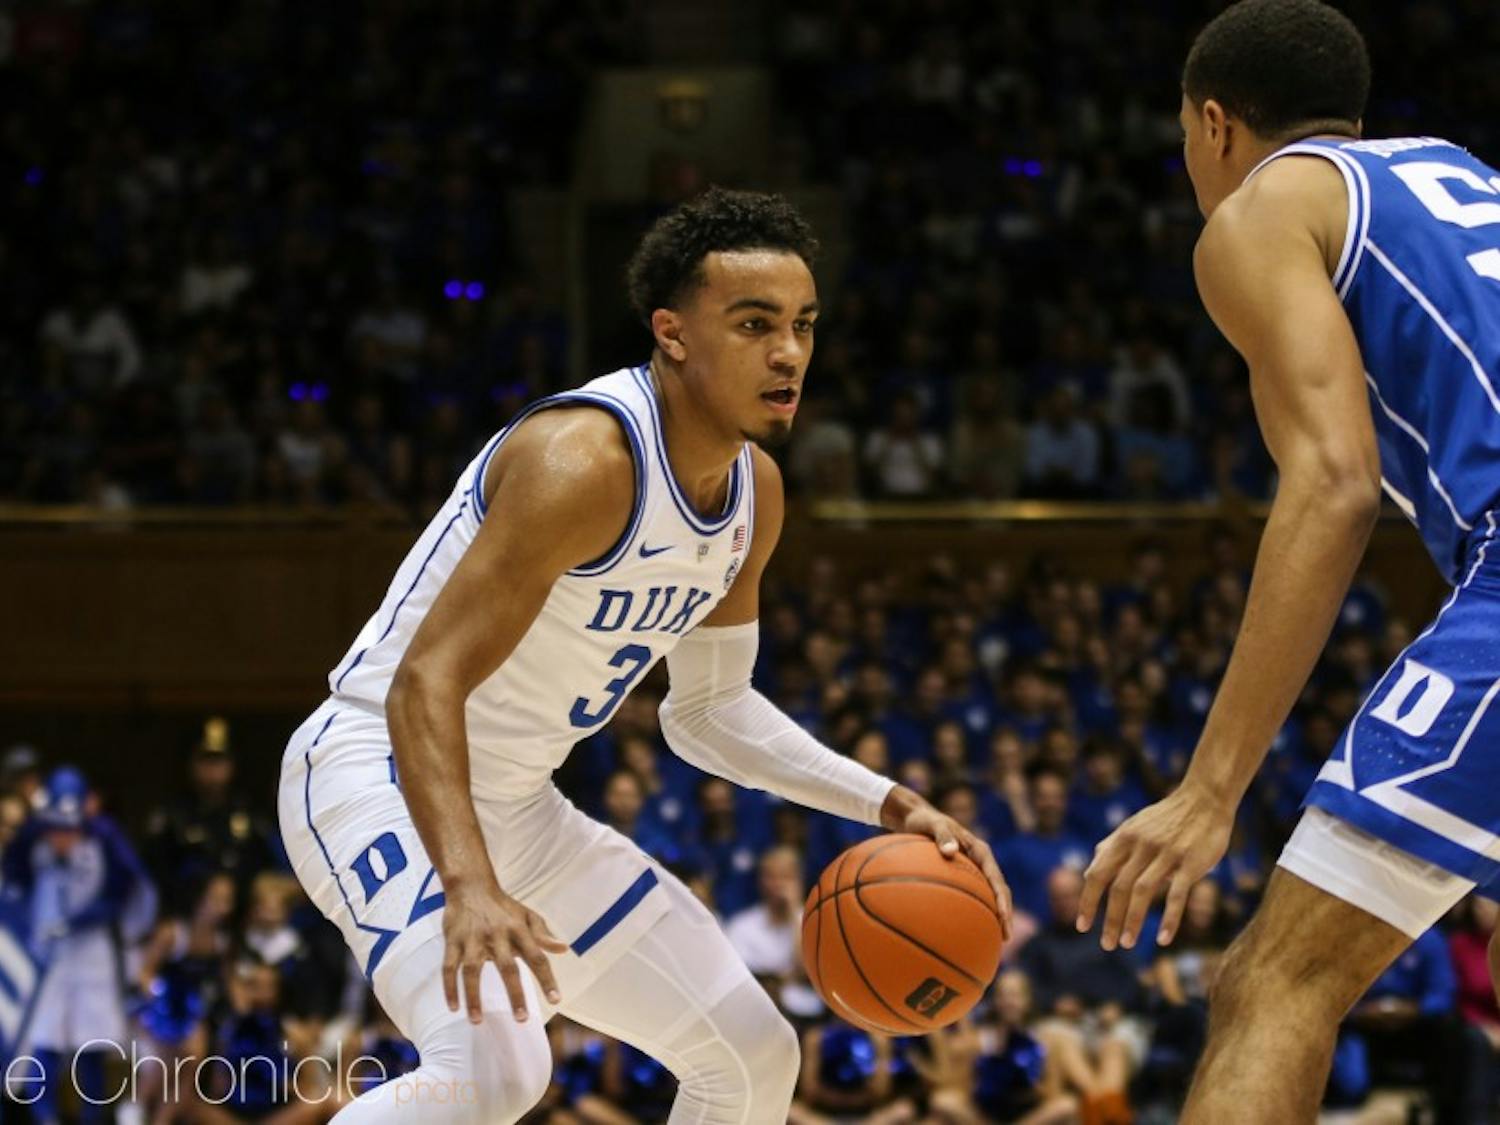 Tre Jones's playmaking should help Duke put away the Tigers early.